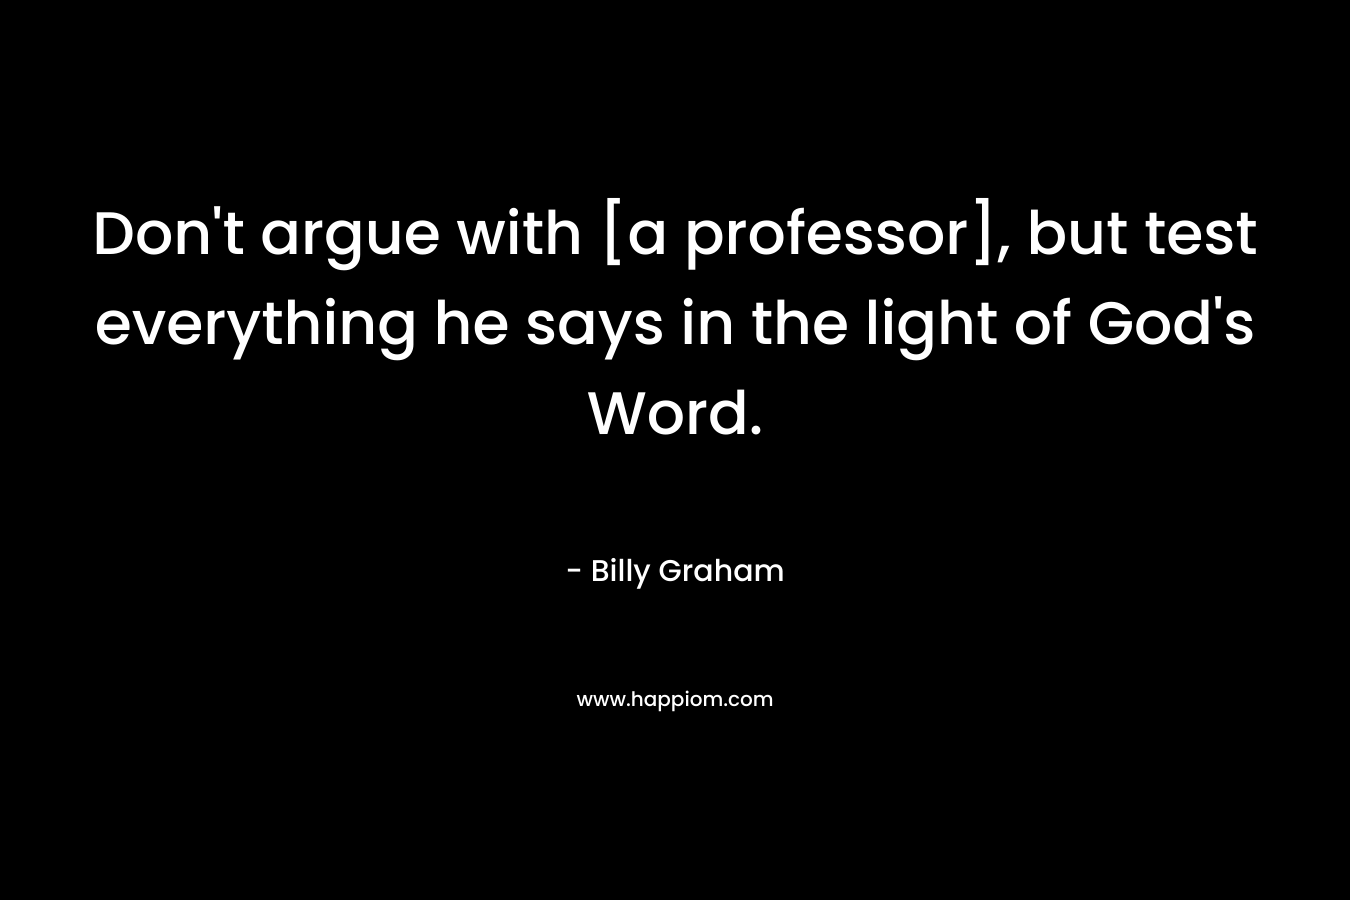 Don't argue with [a professor], but test everything he says in the light of God's Word.